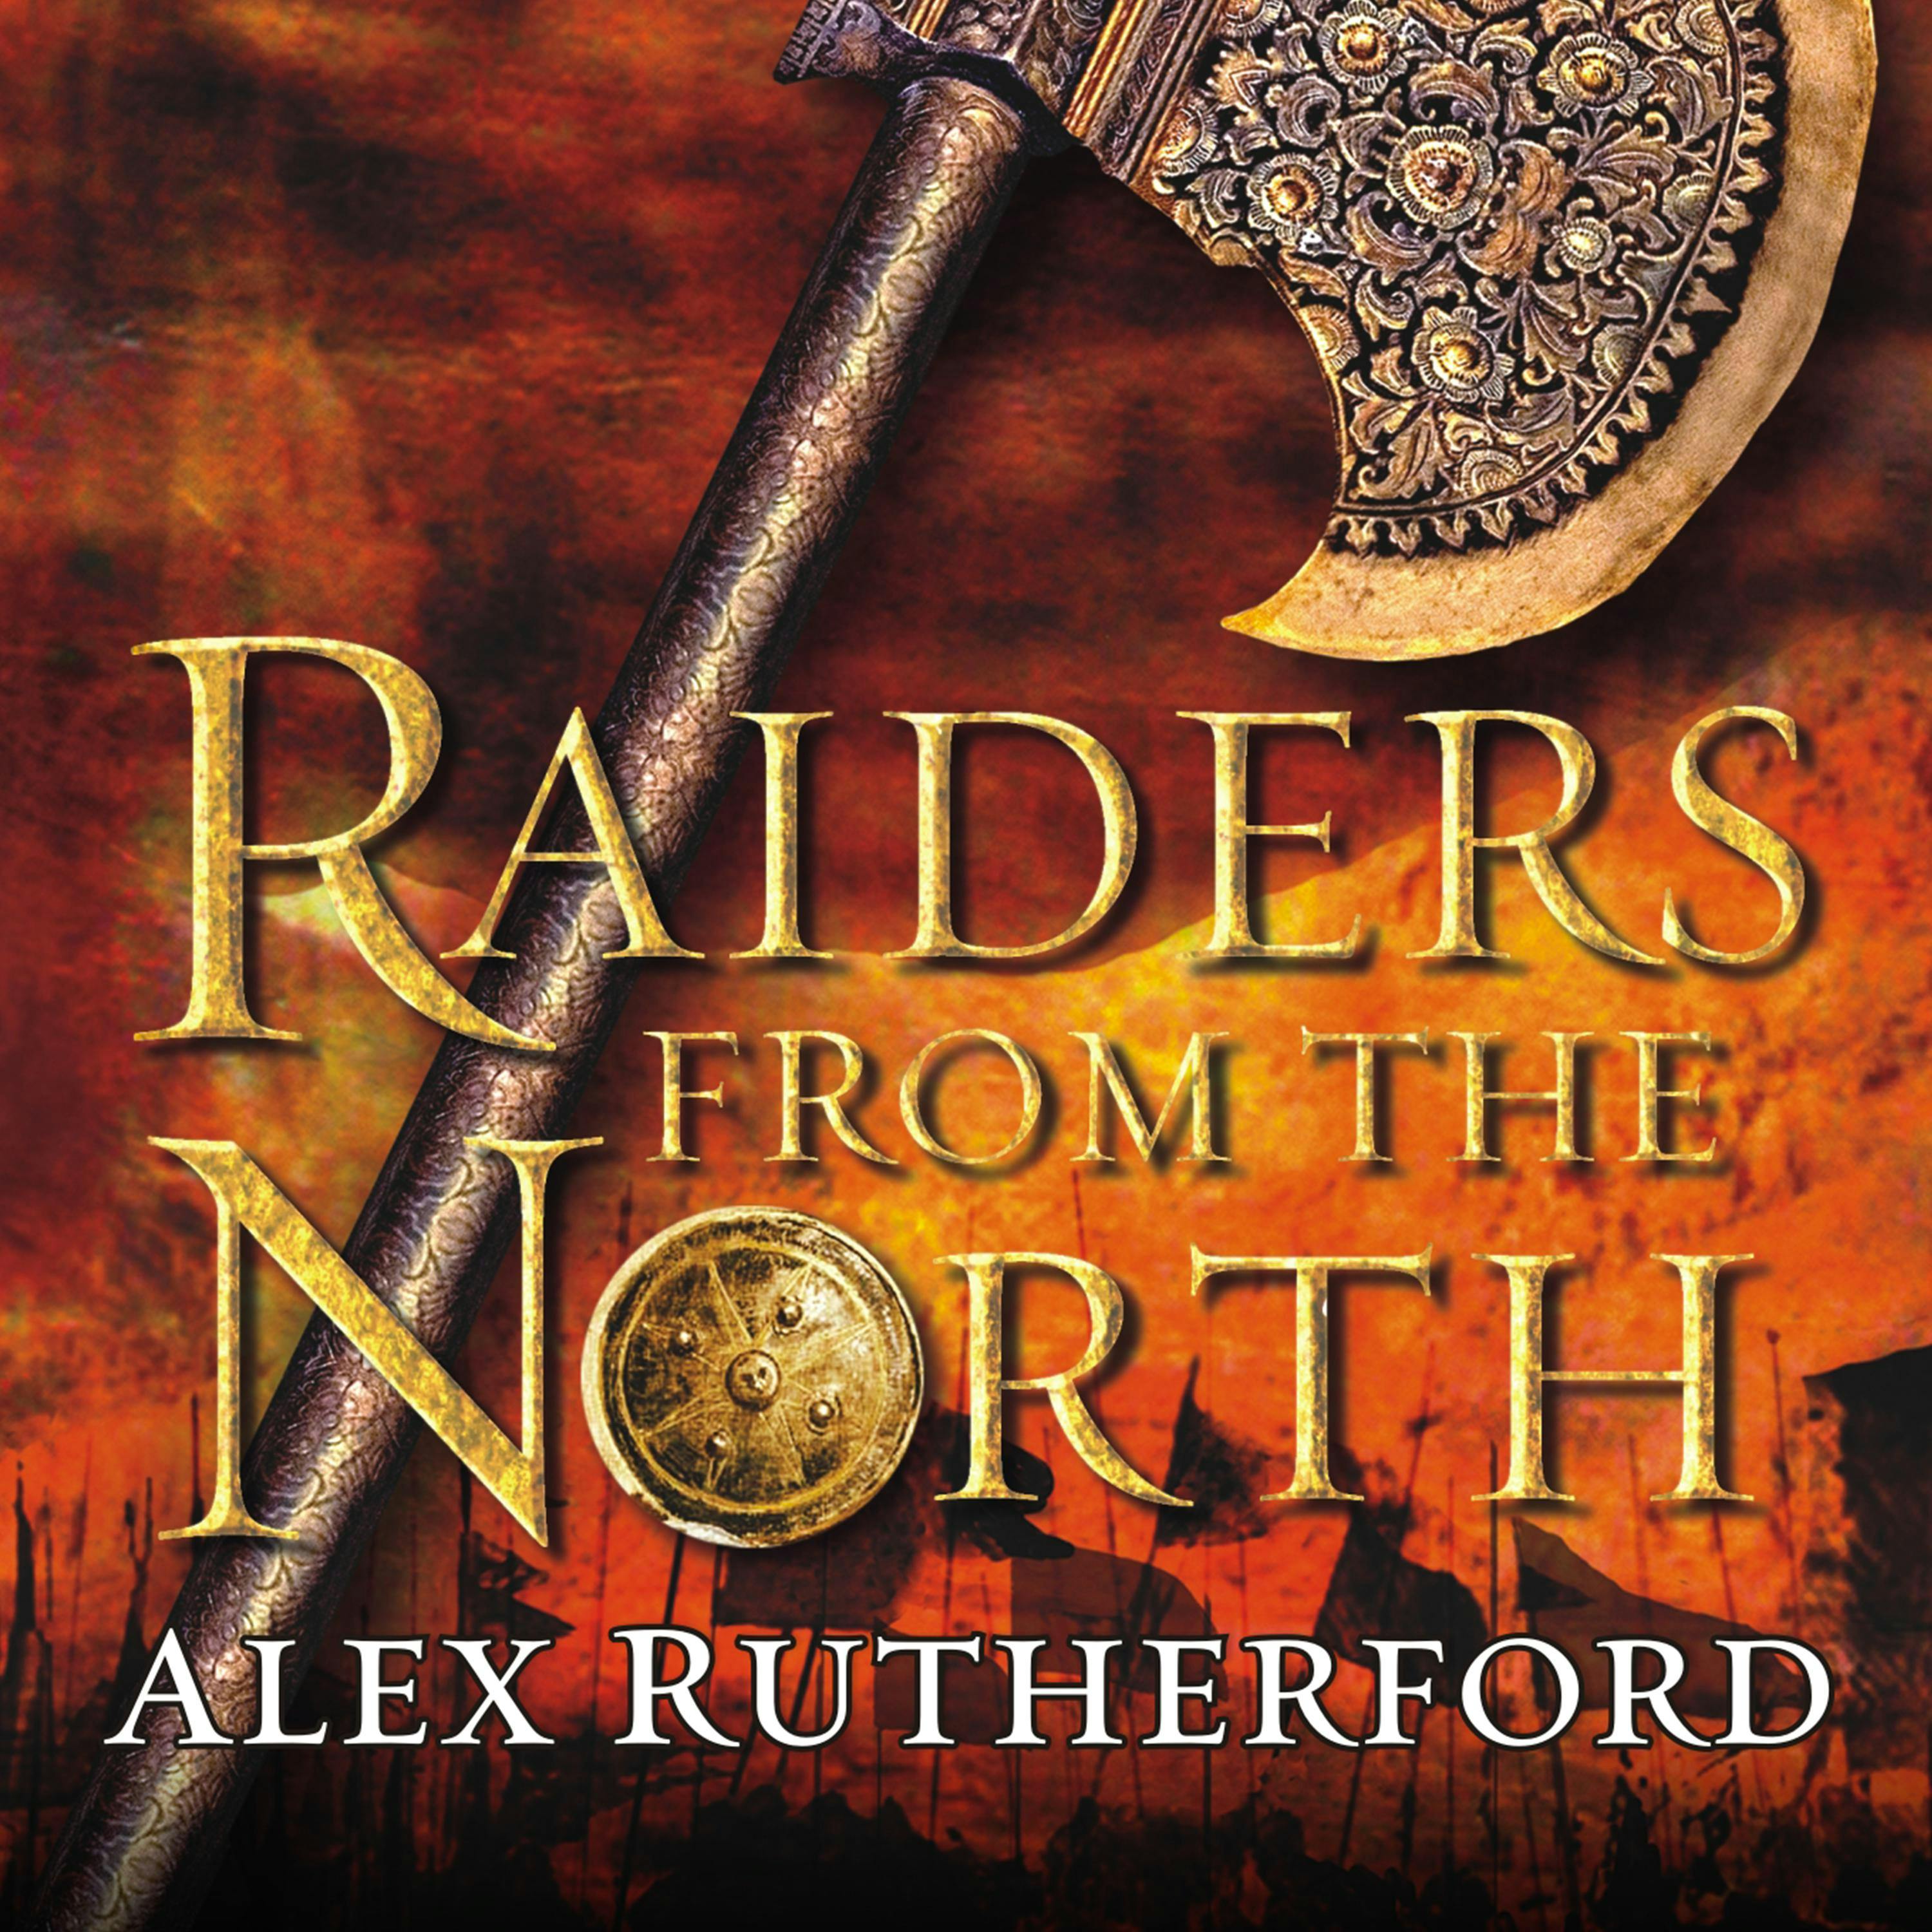 Raiders from the North: Empire of the Moghul - Alex Rutherford